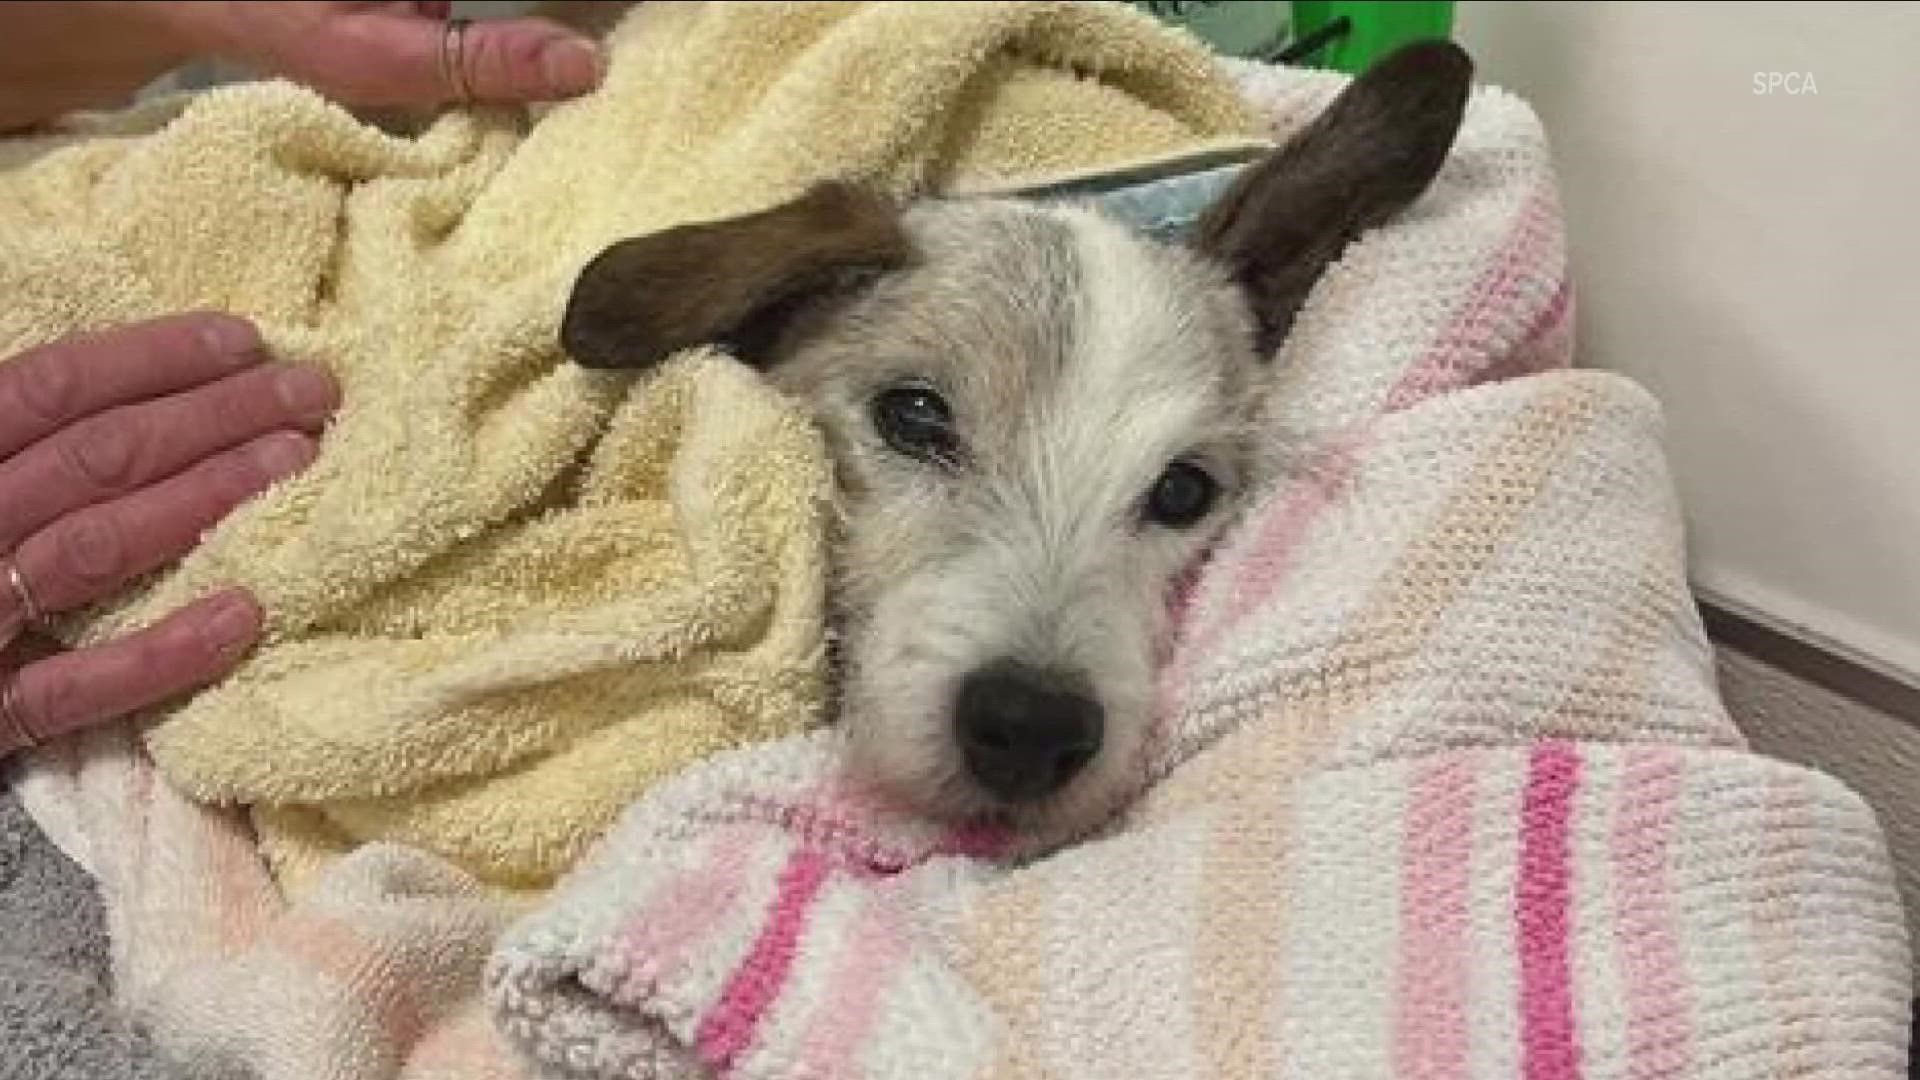 After pulling the Jack Russell out, Jim Skoney took him to the SPCA for treatment and to track down his owner.